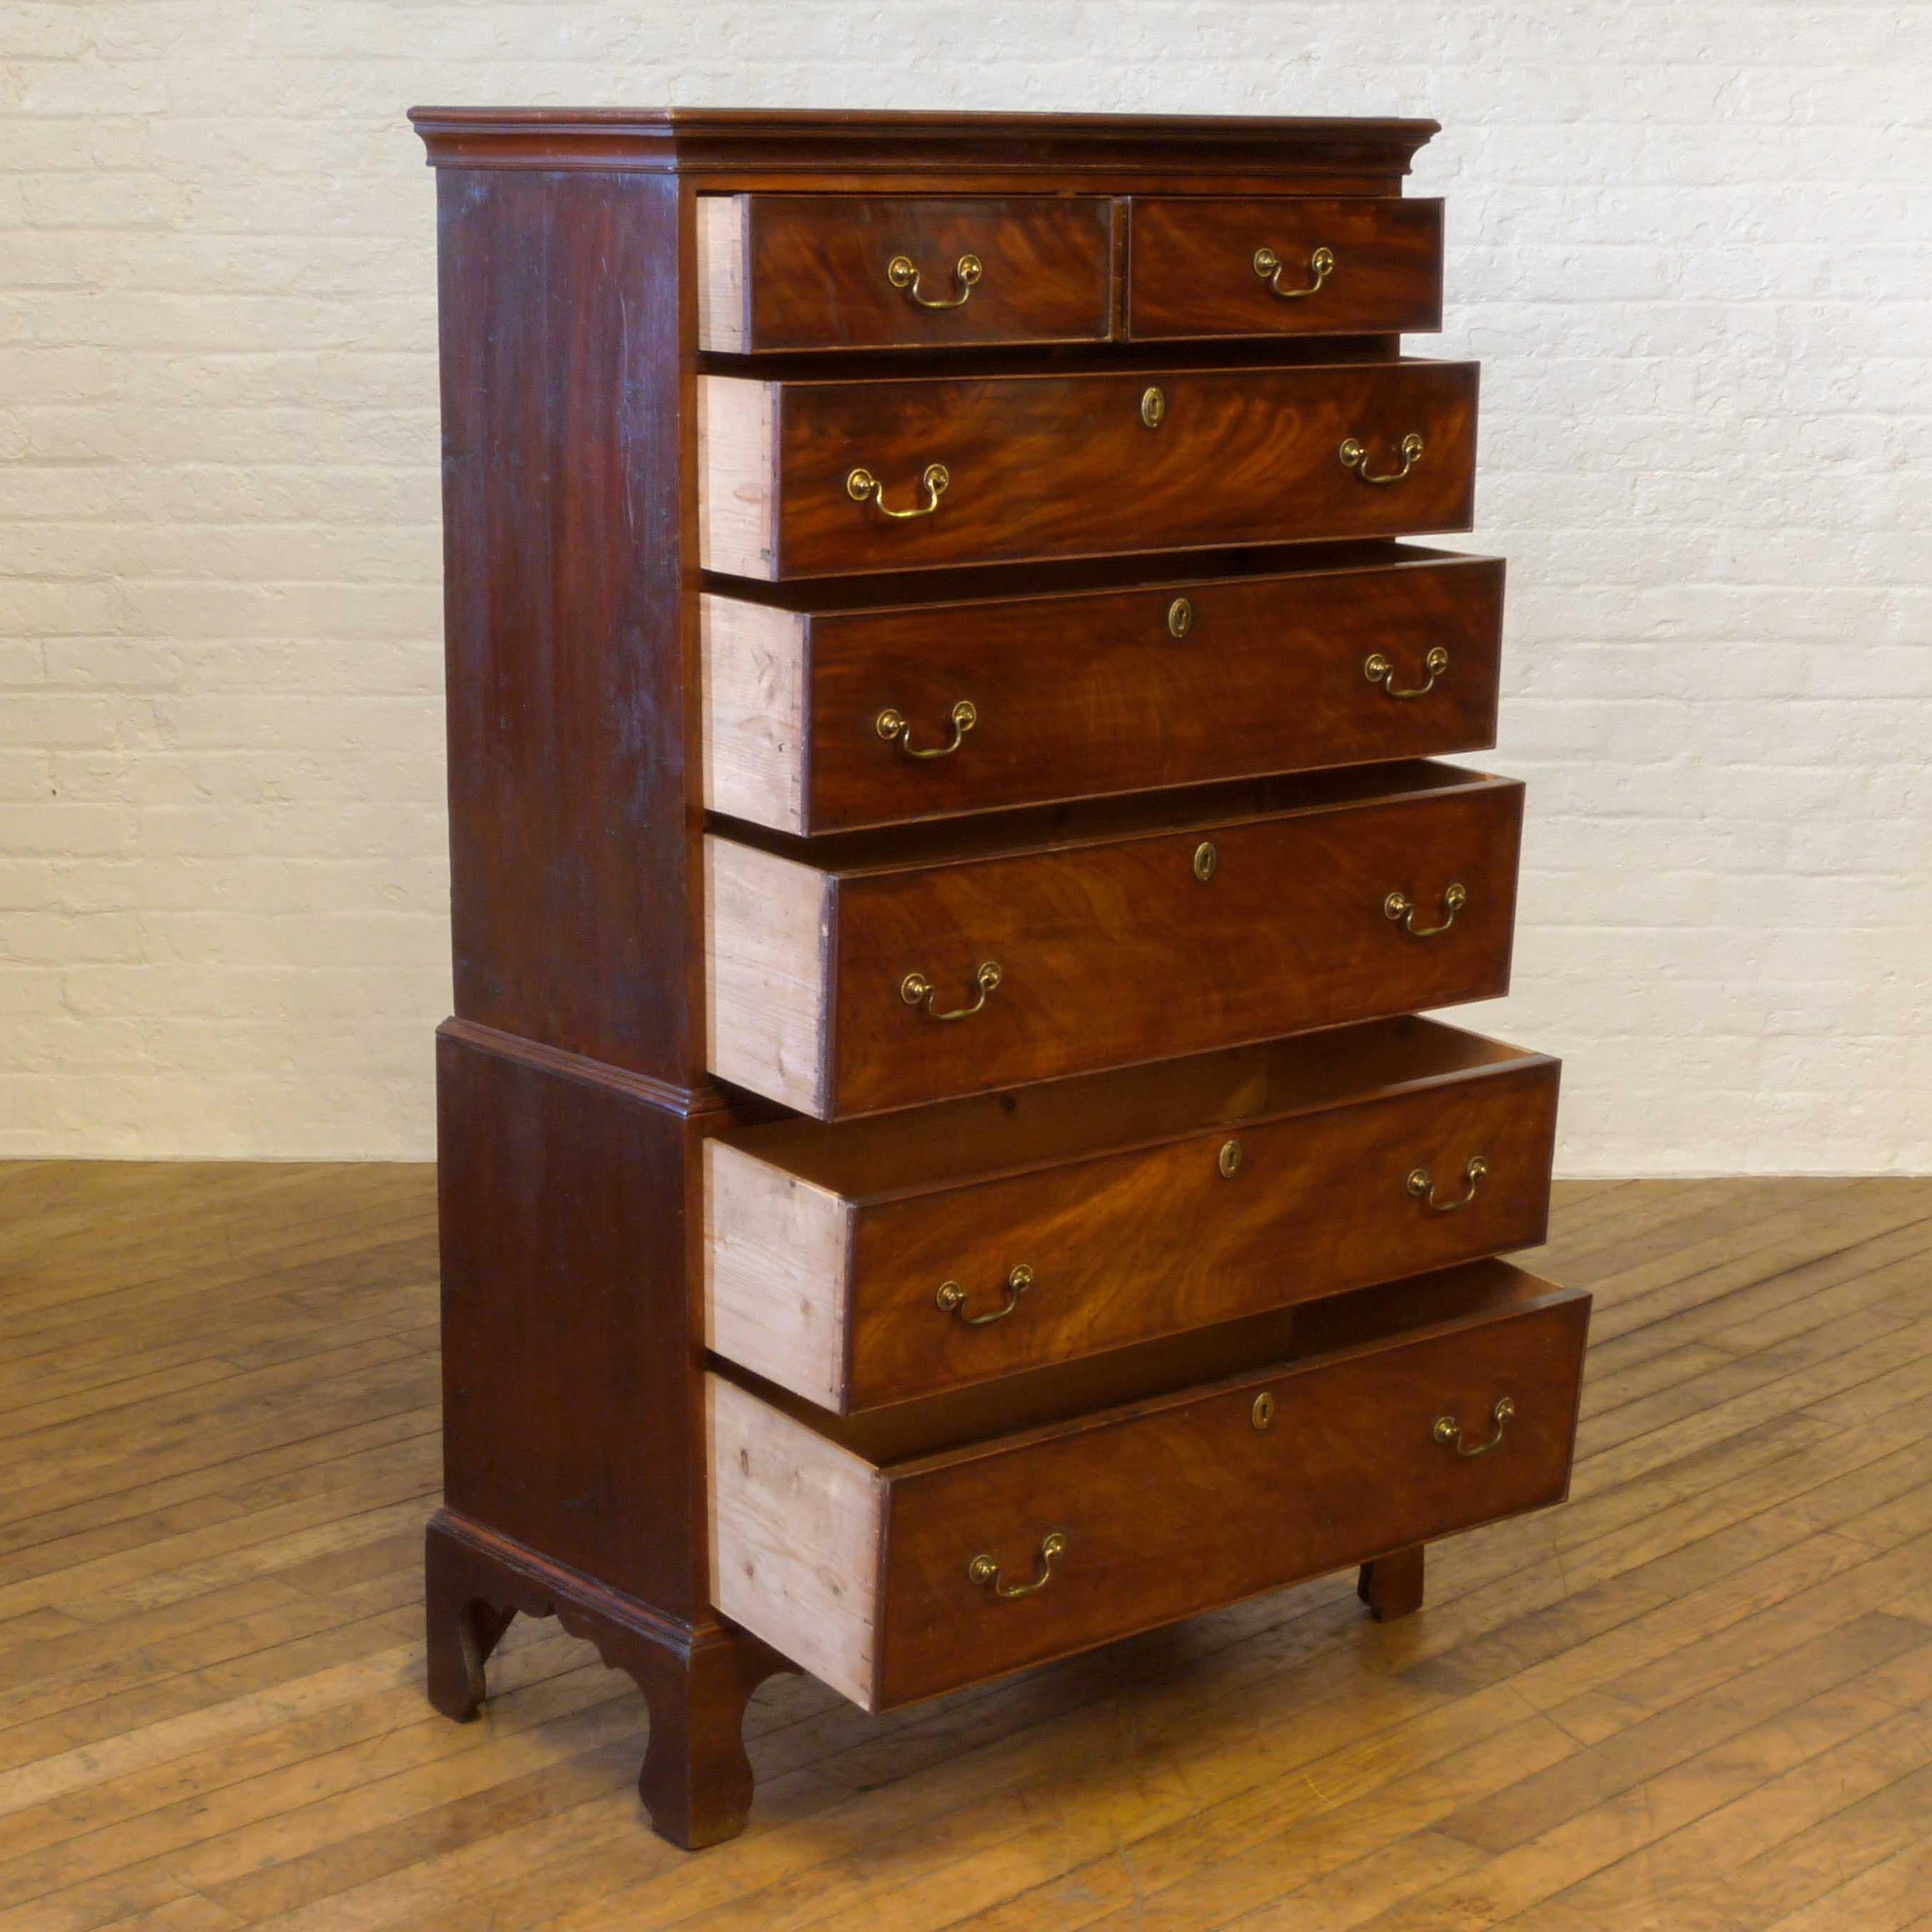 A small and attractive two stage Georgian mahogany chest on chest circa 1800 and possibly of Welsh origins with its stained pine sides. The drawer fronts are nicely figured and still retain their original handles and escutcheons. Nice and original